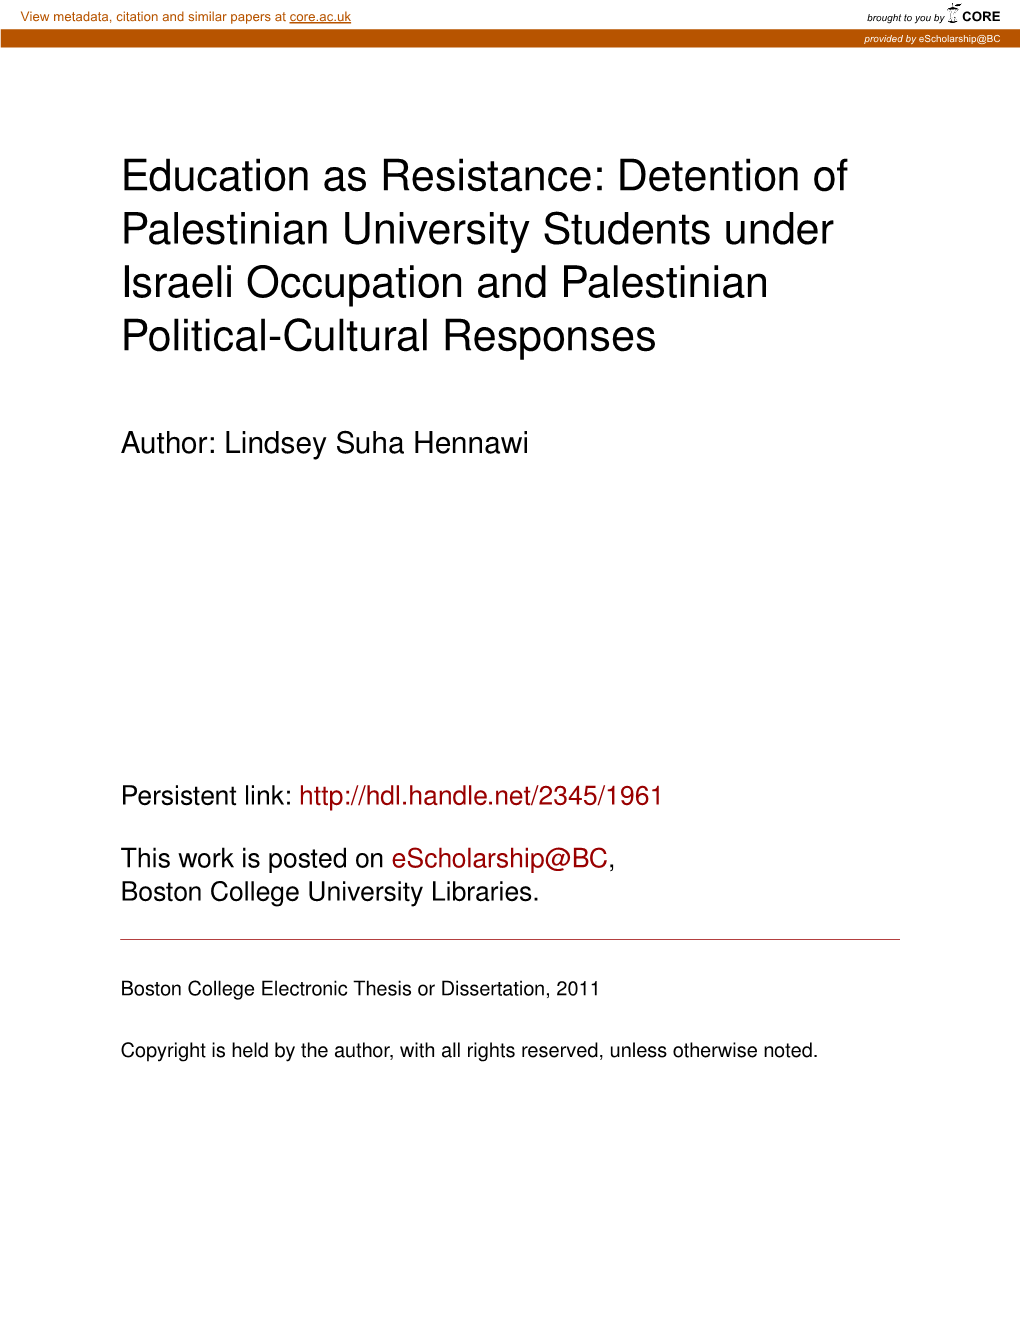 Education As Resistance: Detention of Palestinian University Students Under Israeli Occupation and Palestinian Political-Cultural Responses